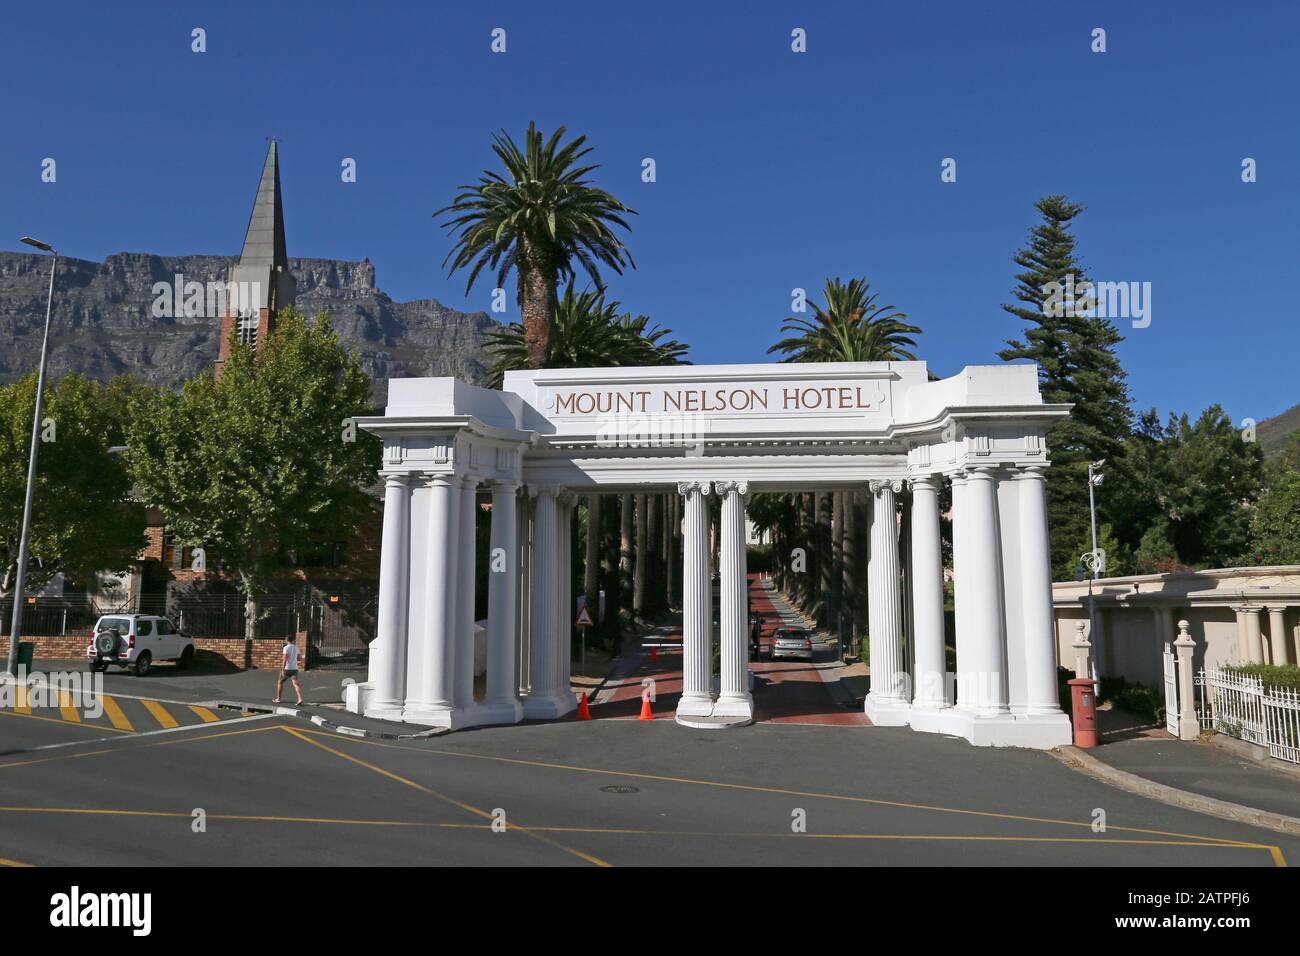 Entrance to Mount Nelson Hotel, Orange Street, Central Business District, Cape Town, Table Bay, Western Cape Province, South Africa, Africa Stock Photo